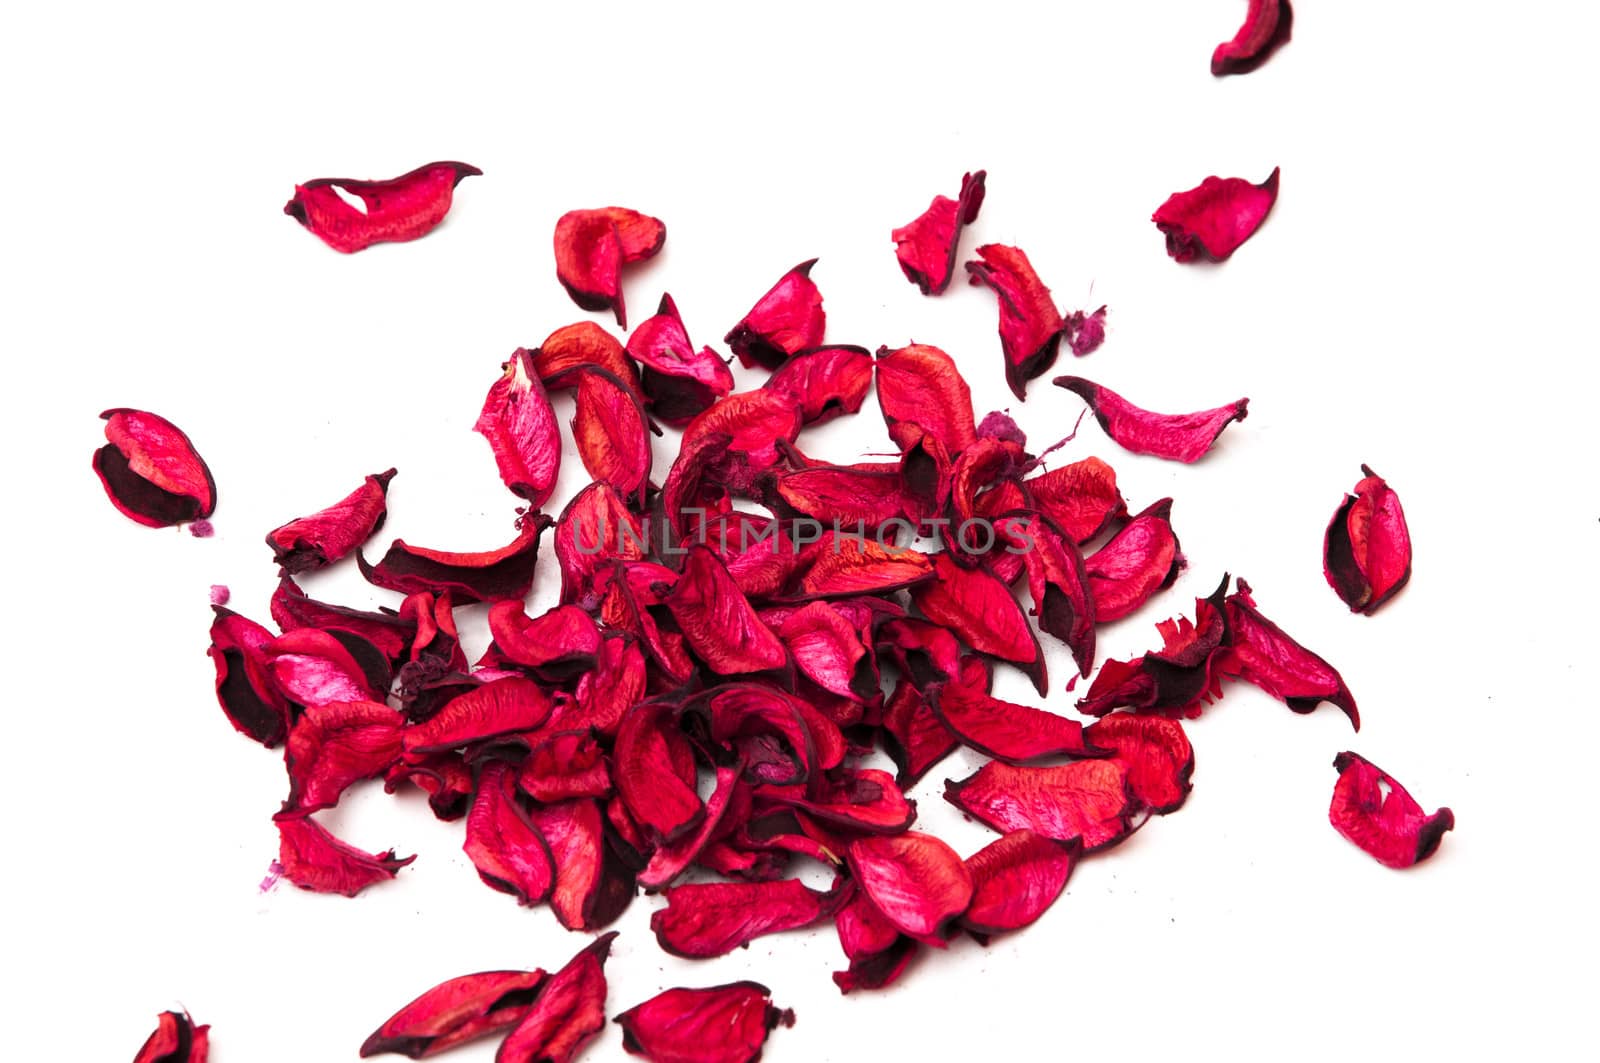 flower petals on a white background